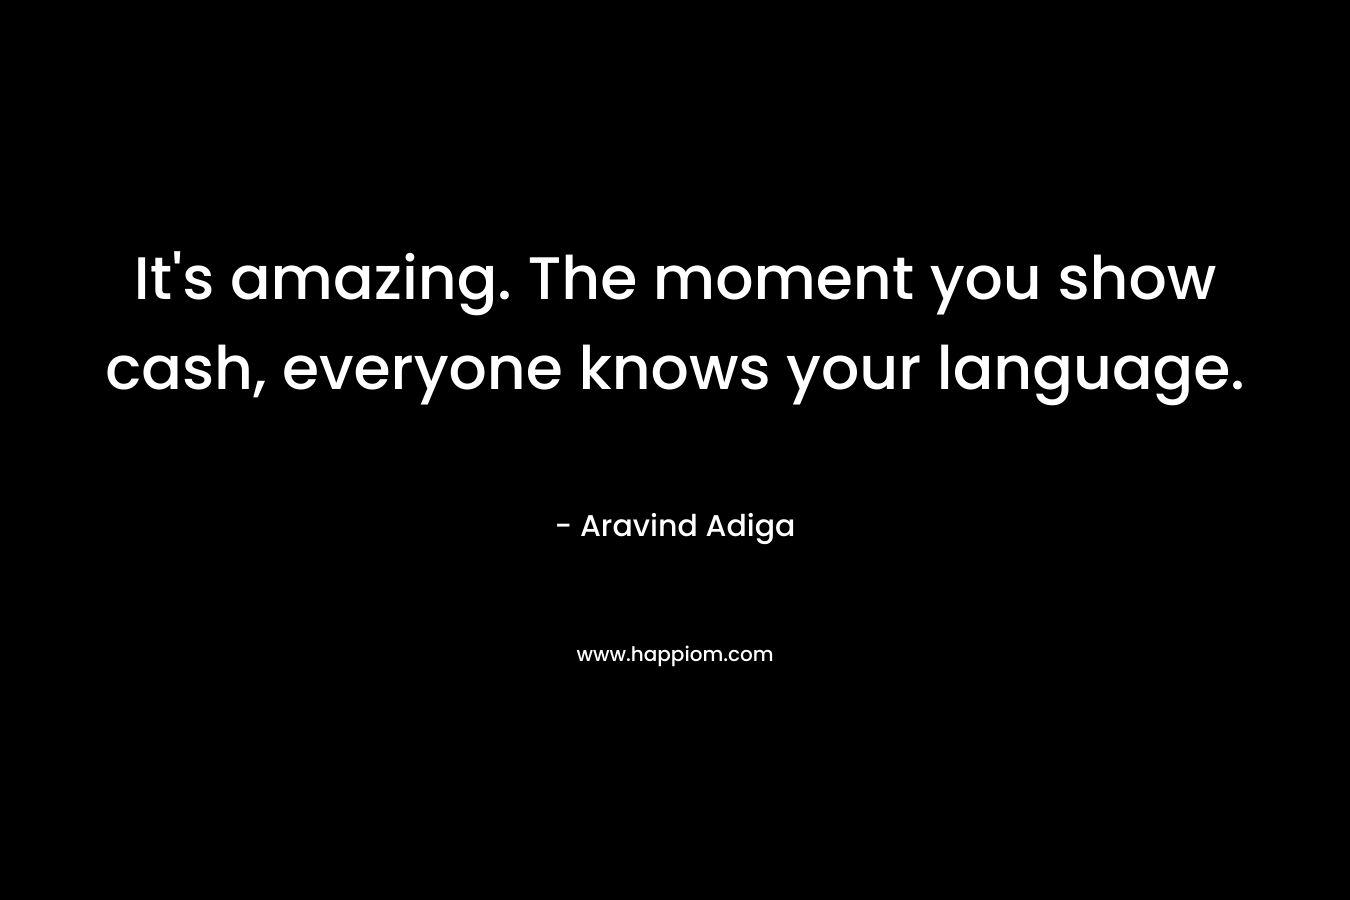 It’s amazing. The moment you show cash, everyone knows your language. – Aravind Adiga